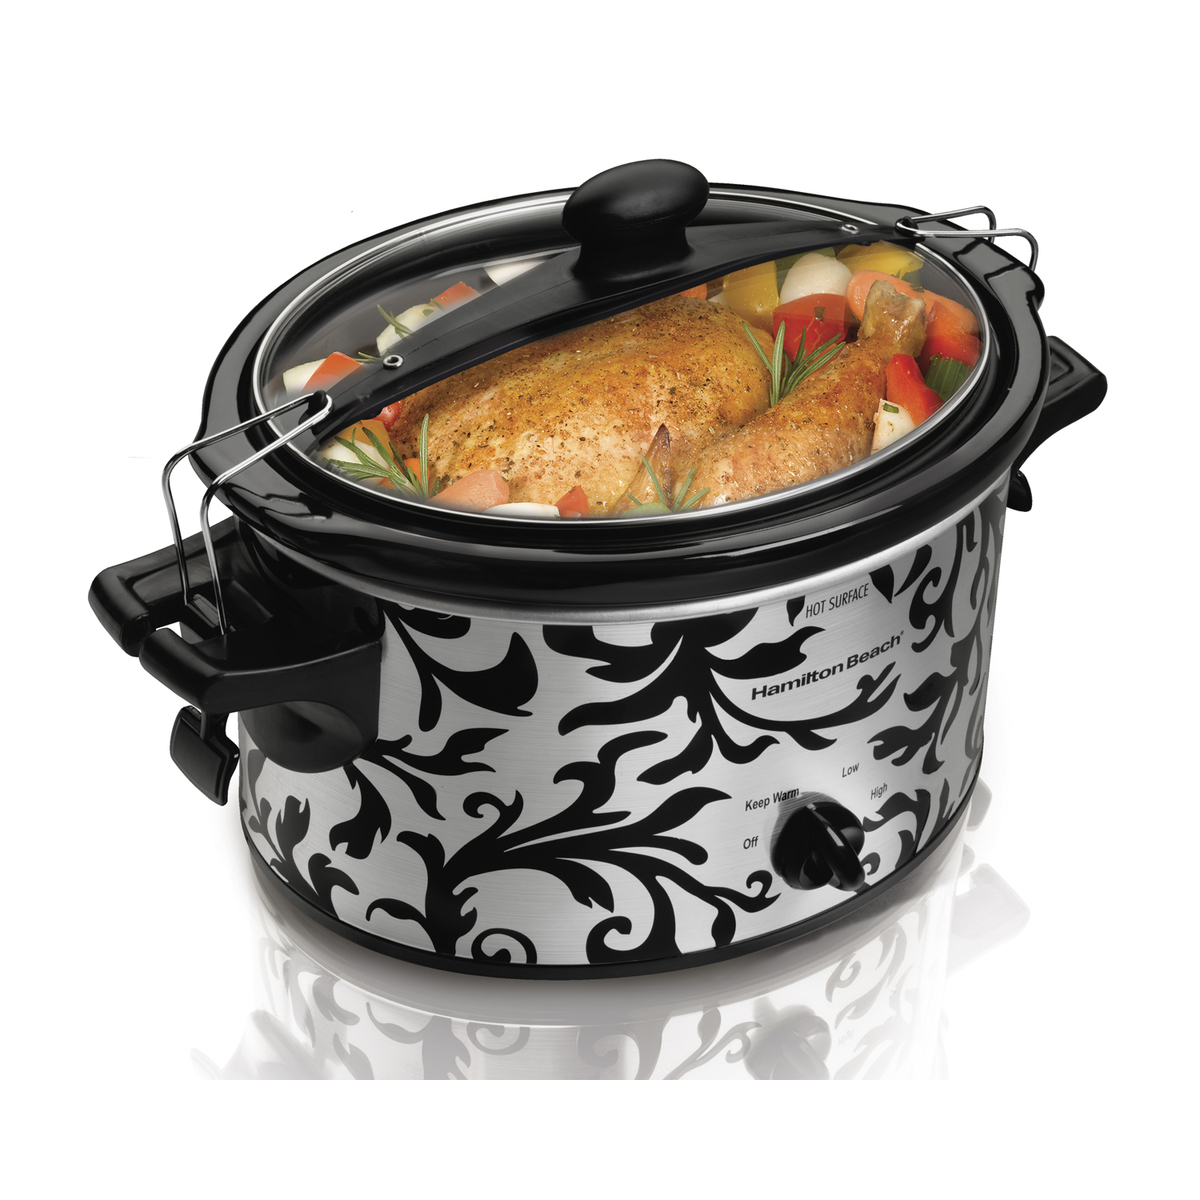 Stay or Go® 4 Quart Slow Cooker (33246T)